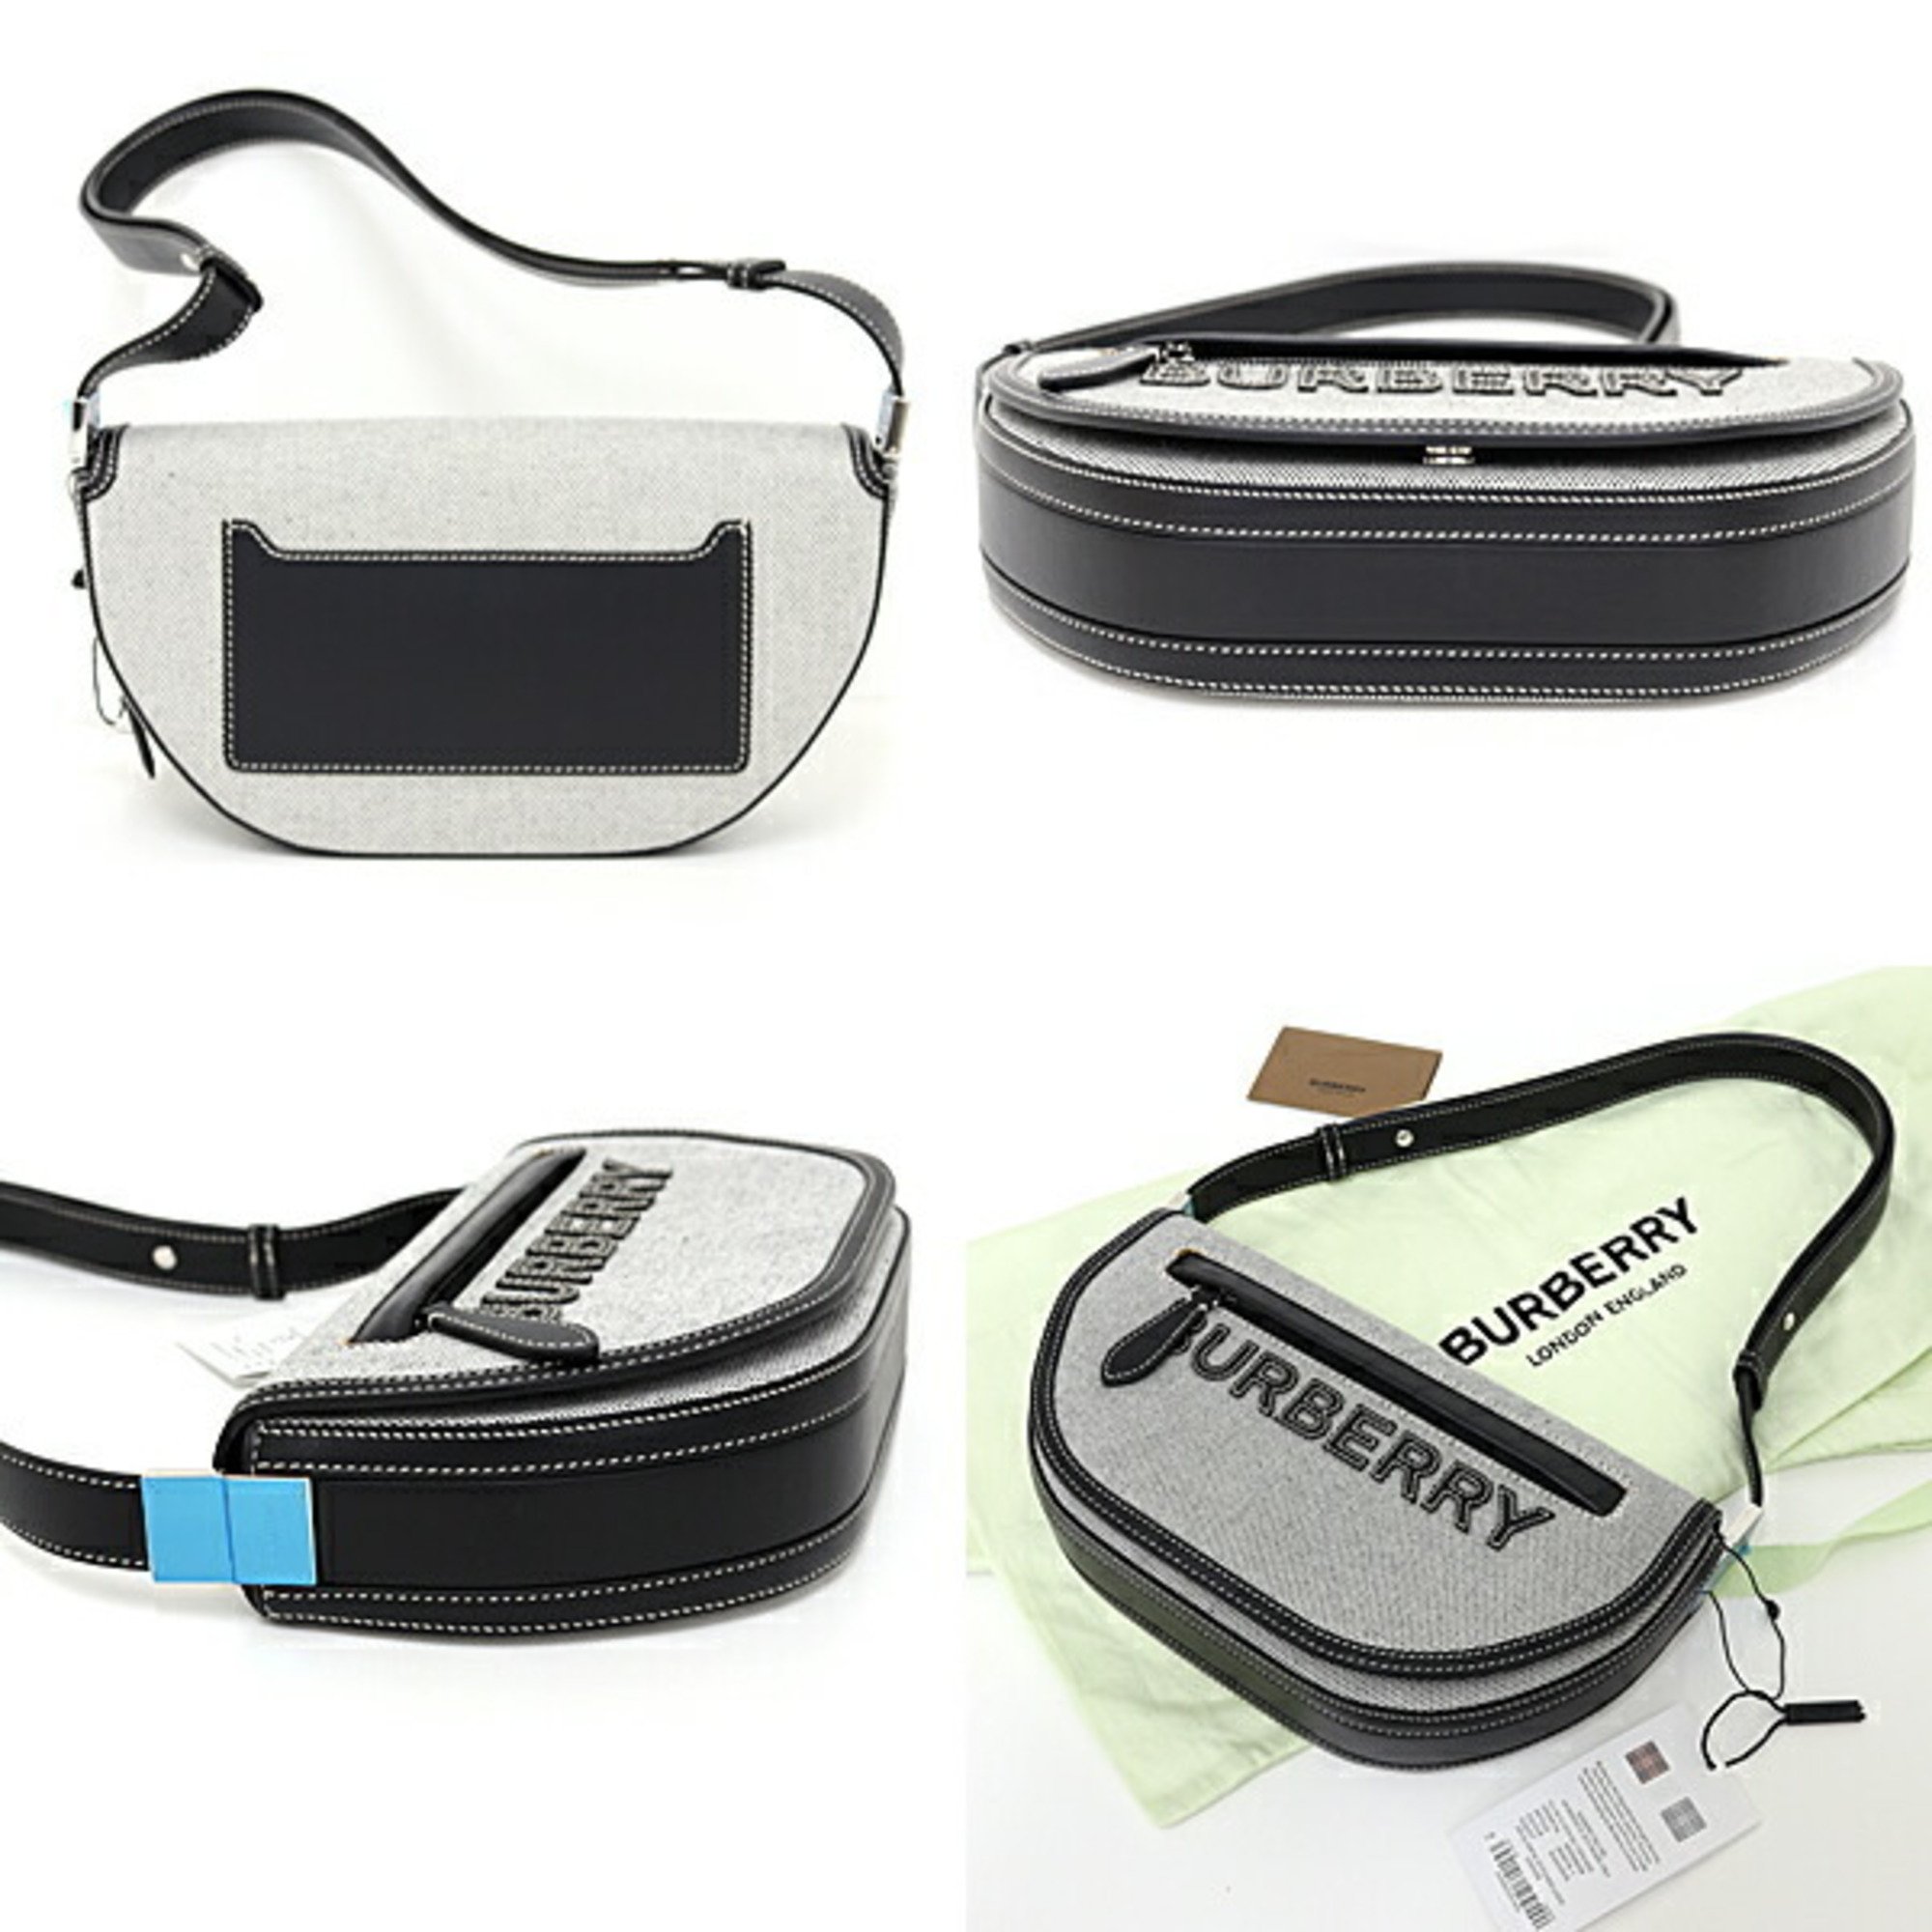 BURBERRY Olympia Shoulder Bag Cotton Leather 8039779 Black White